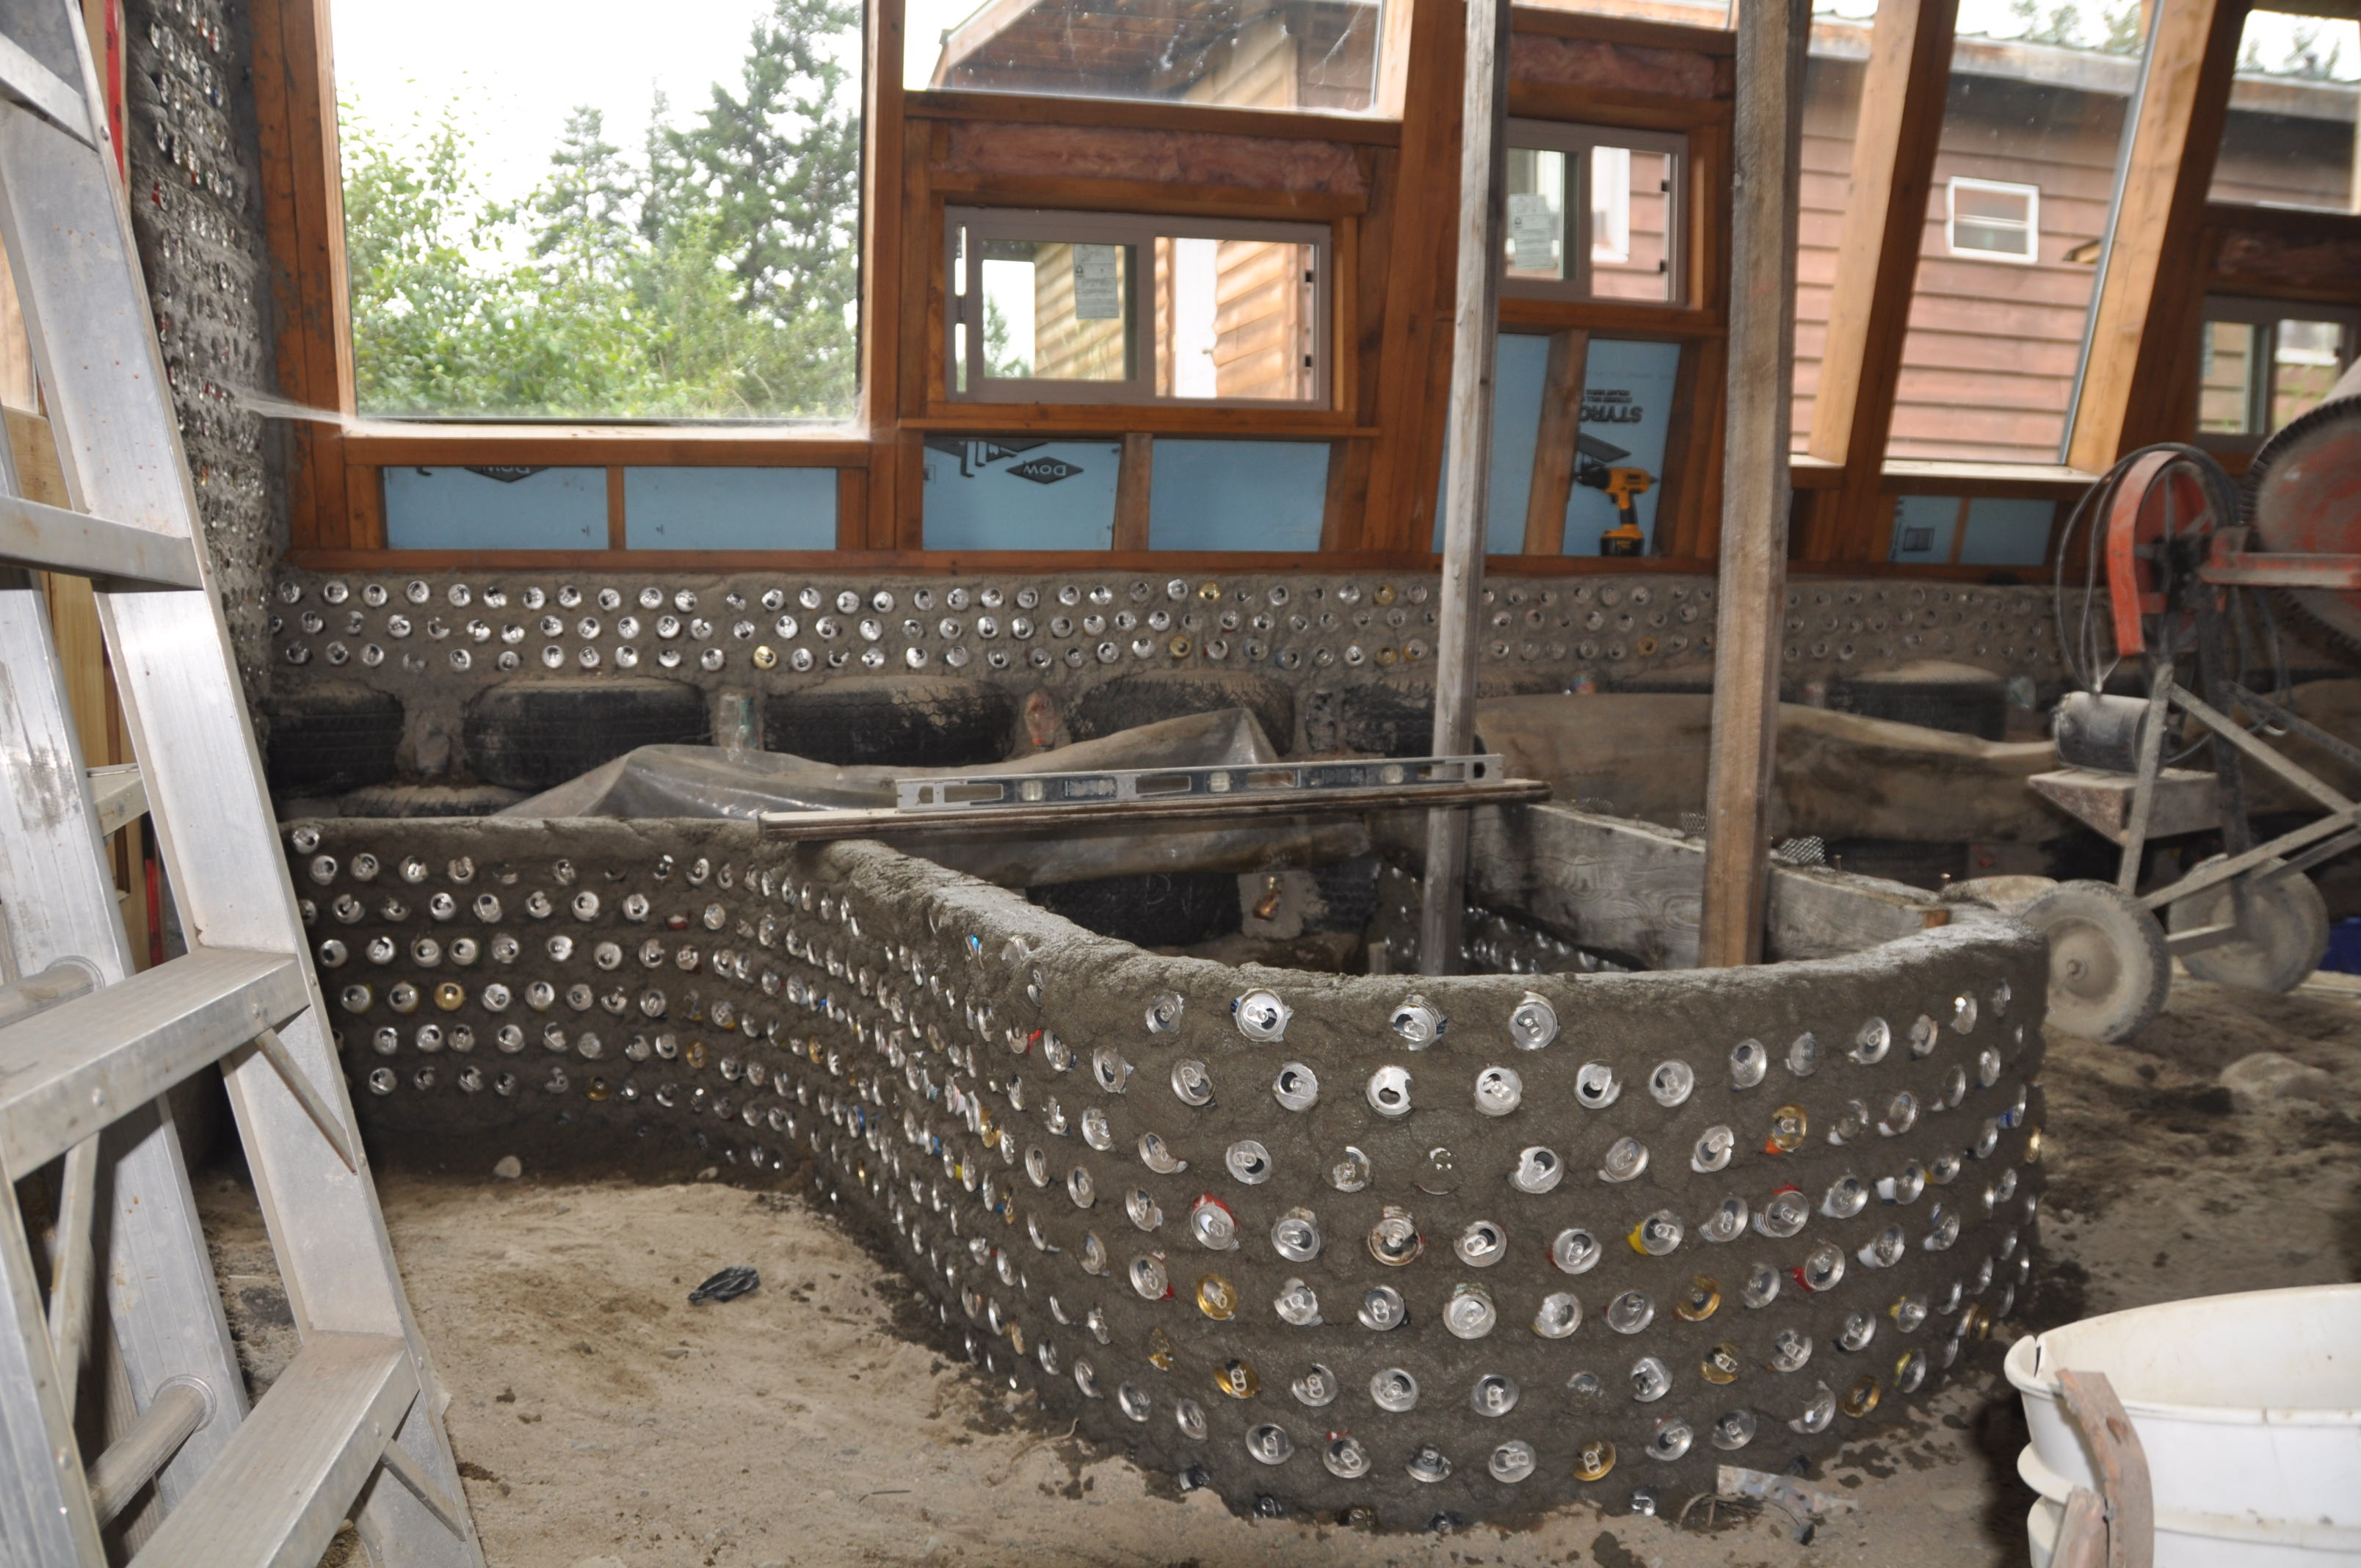 Laying Out Grey Water Planters and Plumbing for the Earthship